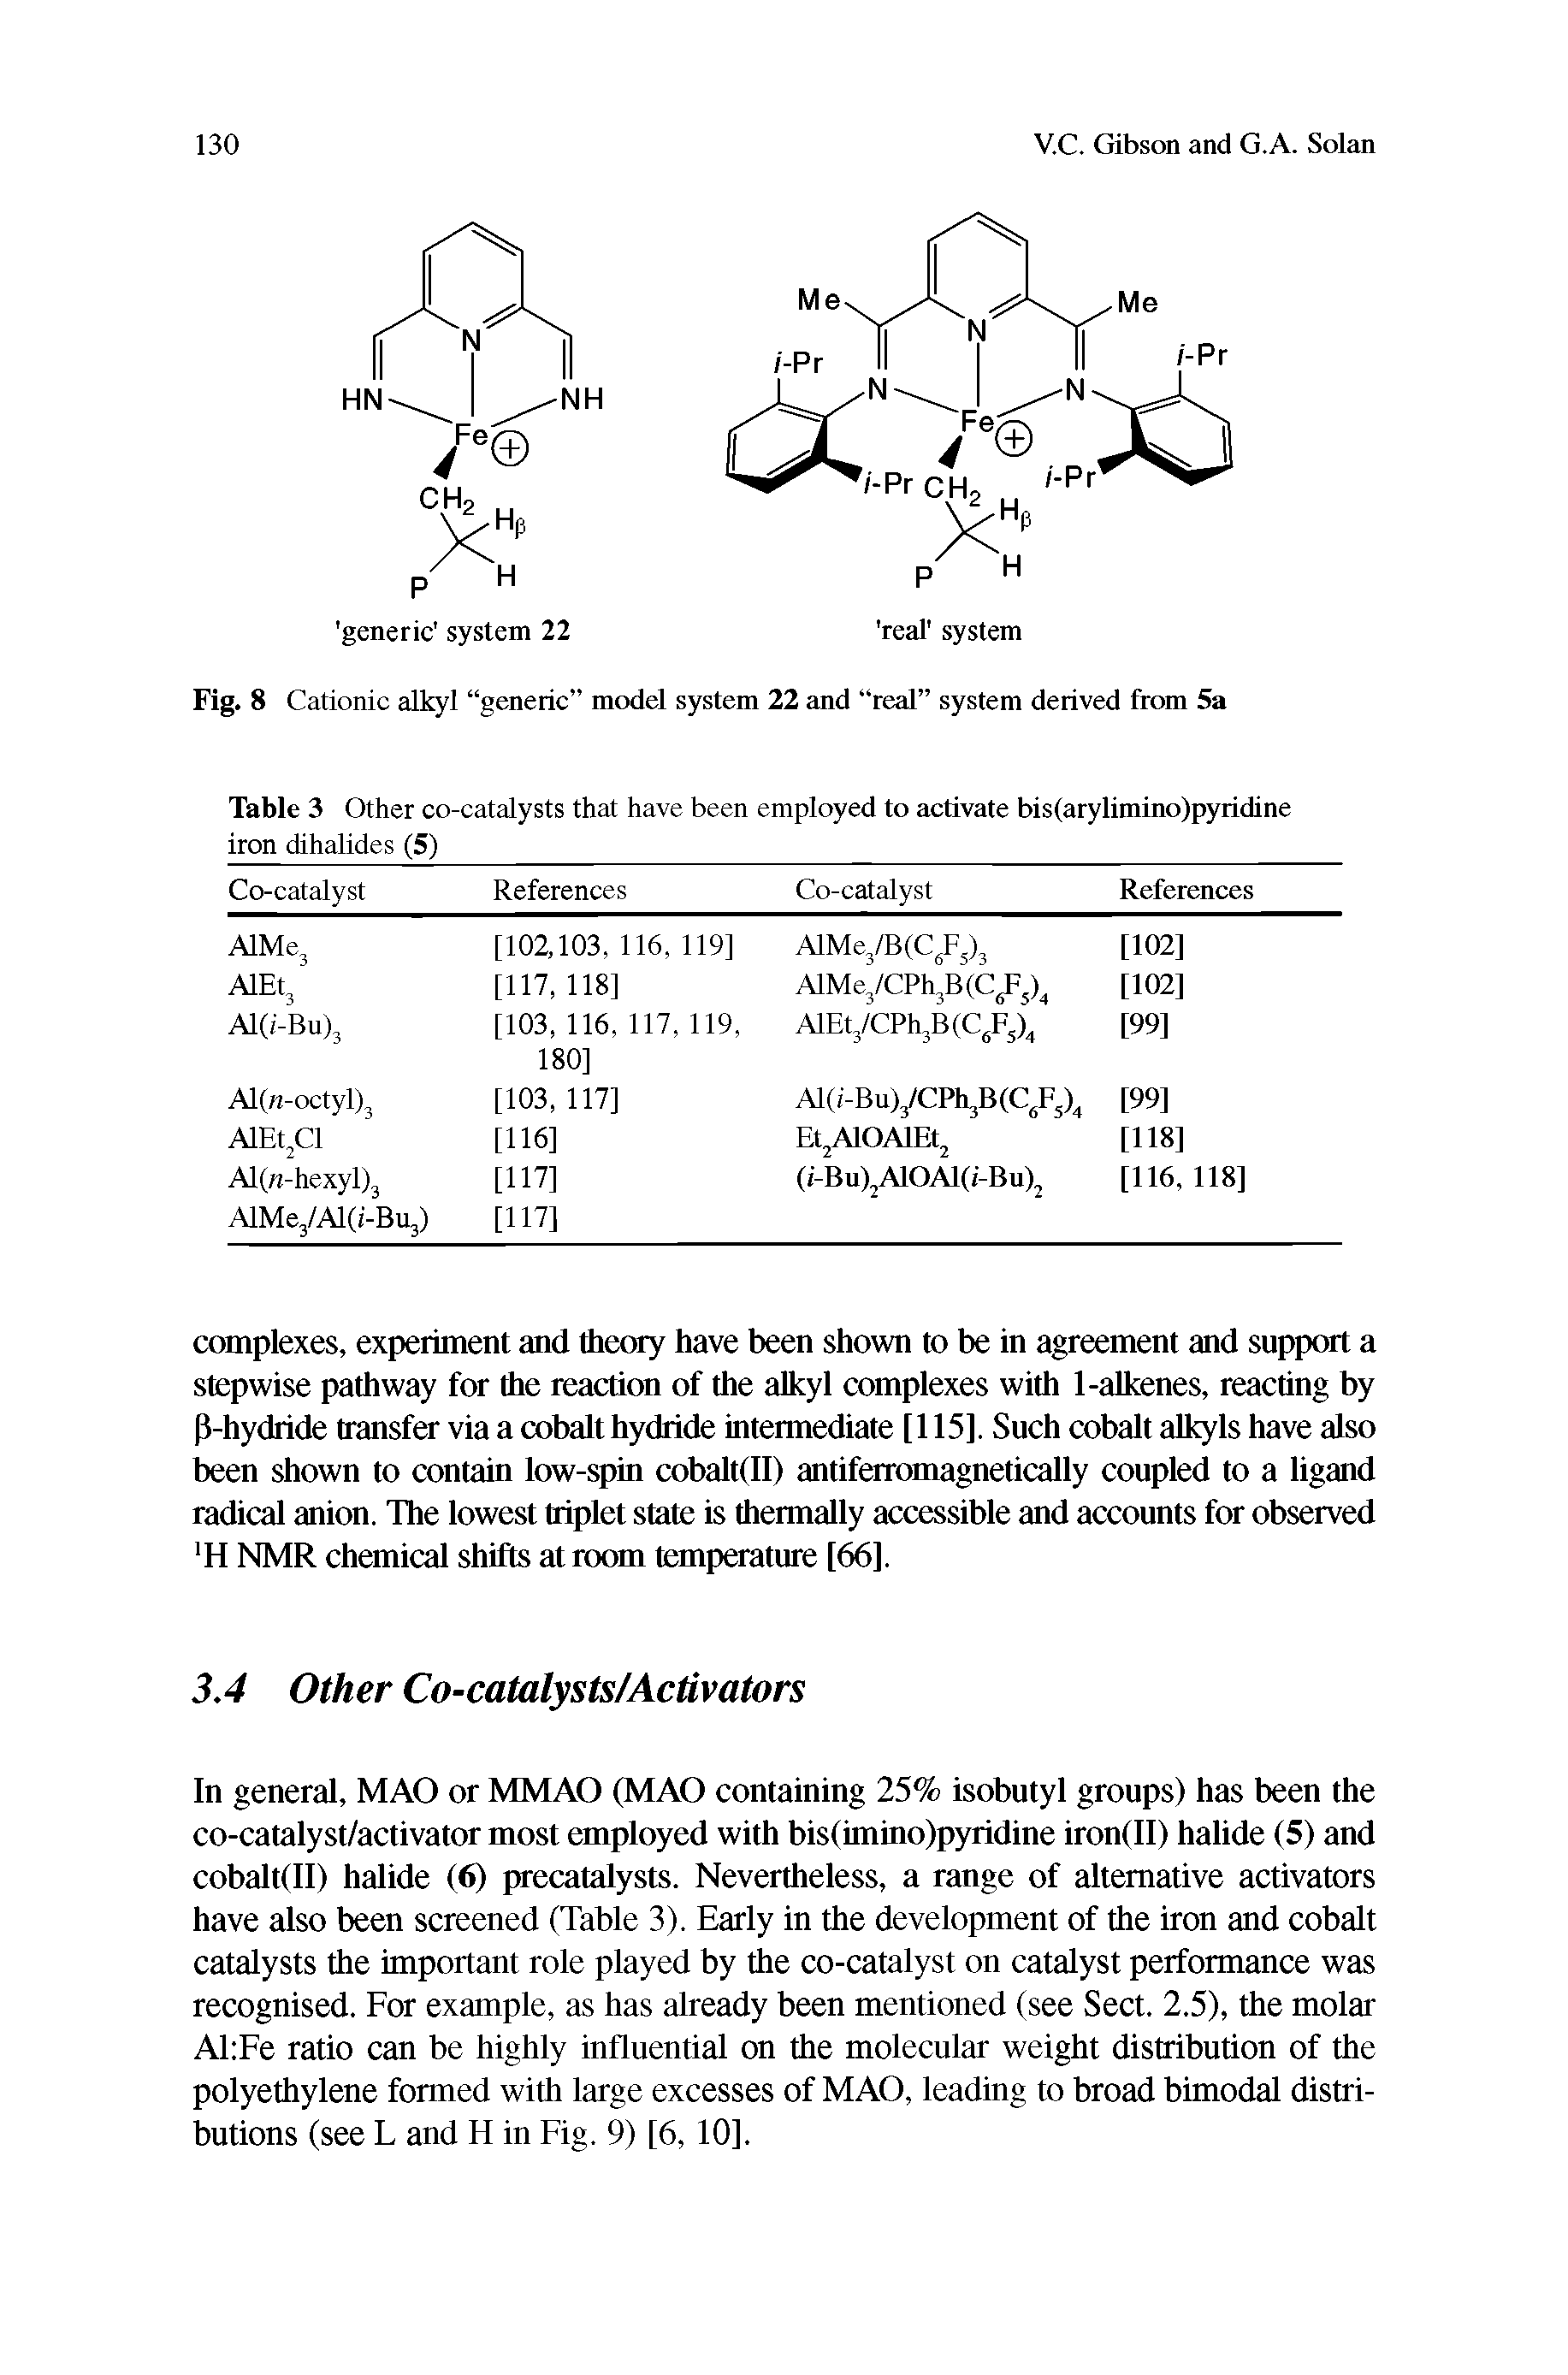 Table 3 Other co-catalysts that have been employed to activate bis(arylimino)pyridine iron dihalides (5)...